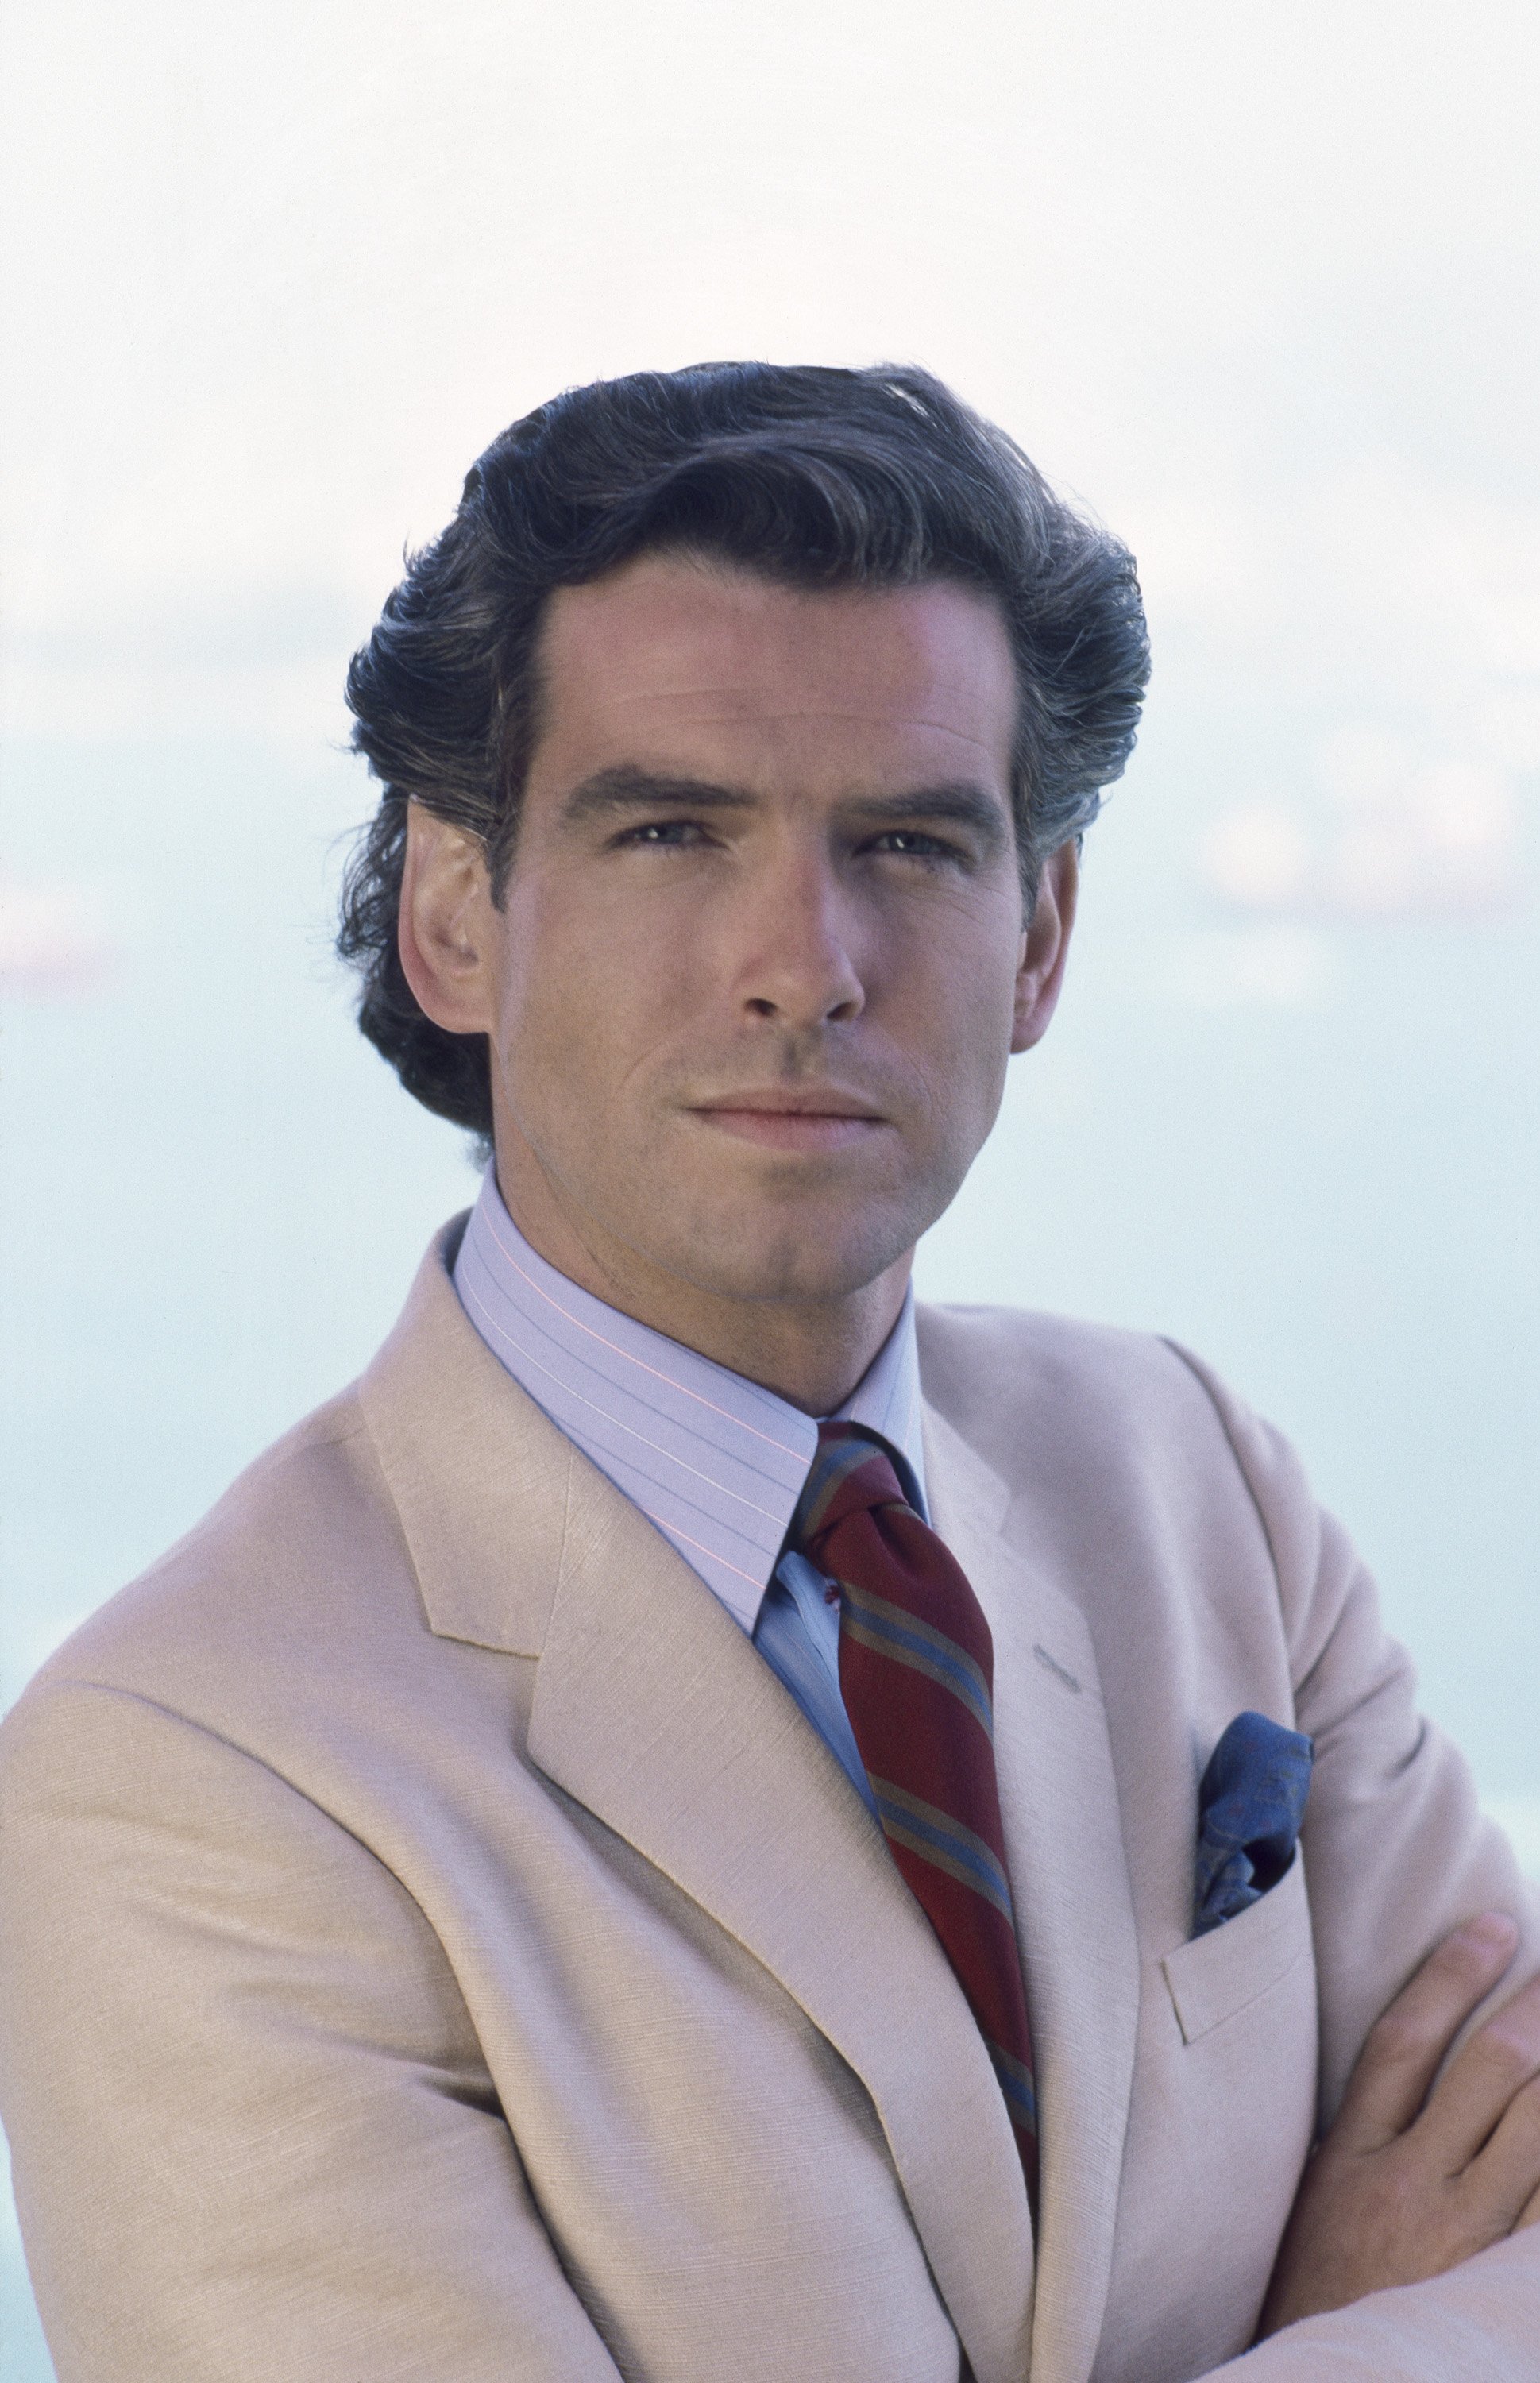 Pierce Brosnan as Remington Steele in the early '80s | Source: Getty Images